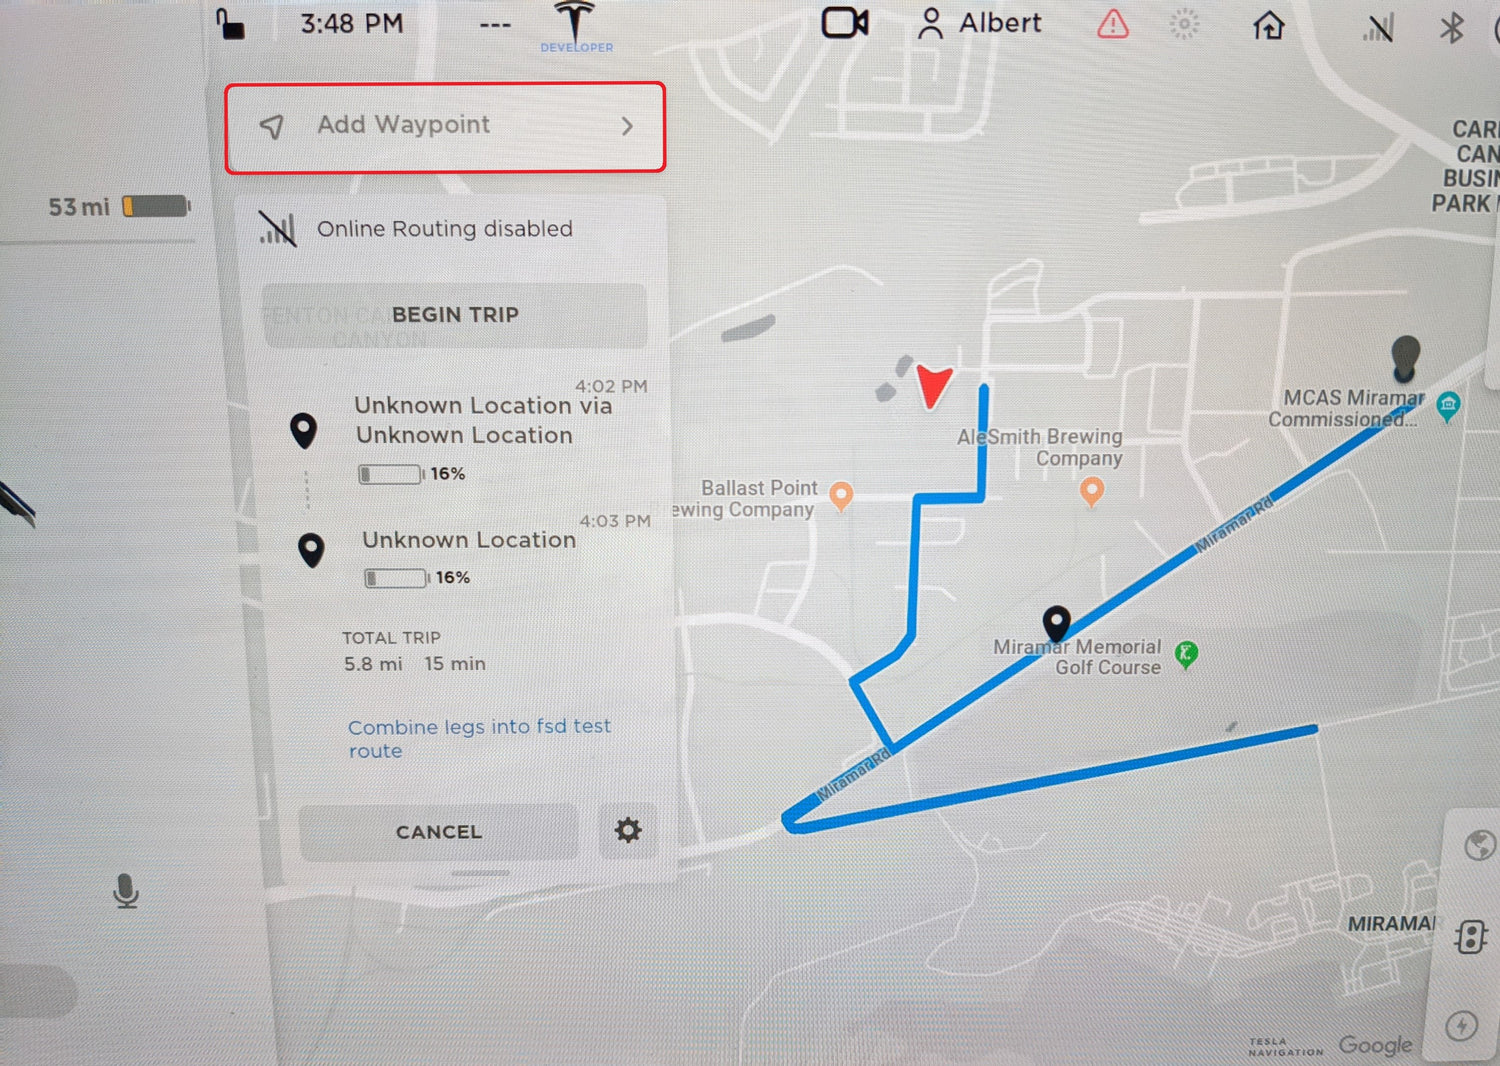 Tesla Navigation Waypoints Spotted in Coding, Could Be One of Elon Musk's Holiday OTA Presents